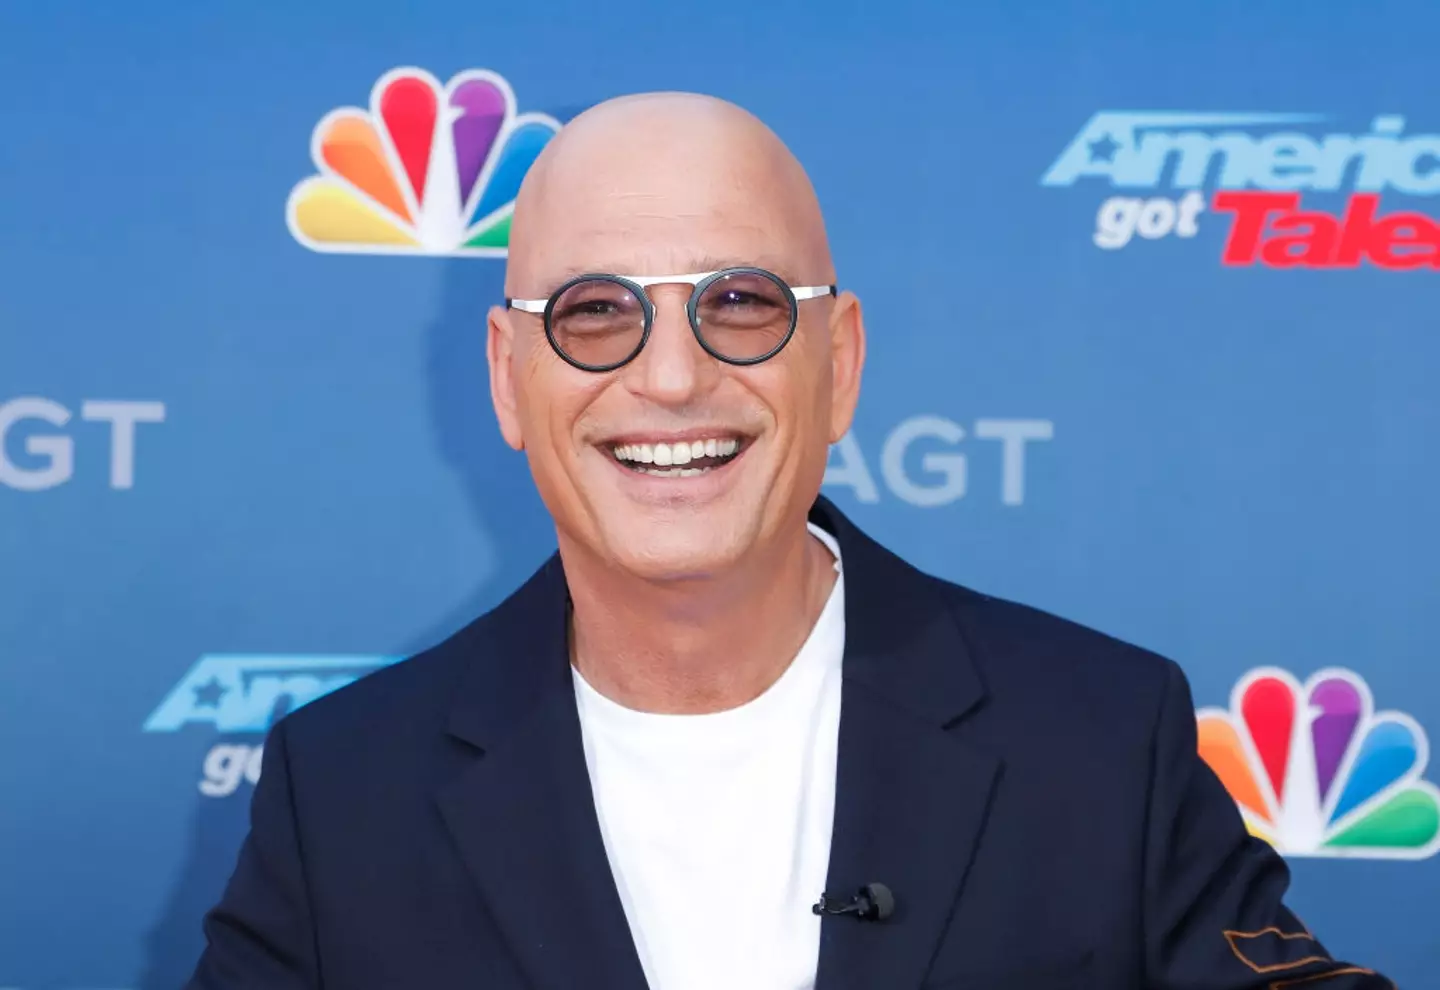 Howie Mandel has been candid about his OCD diagnosis in the past.